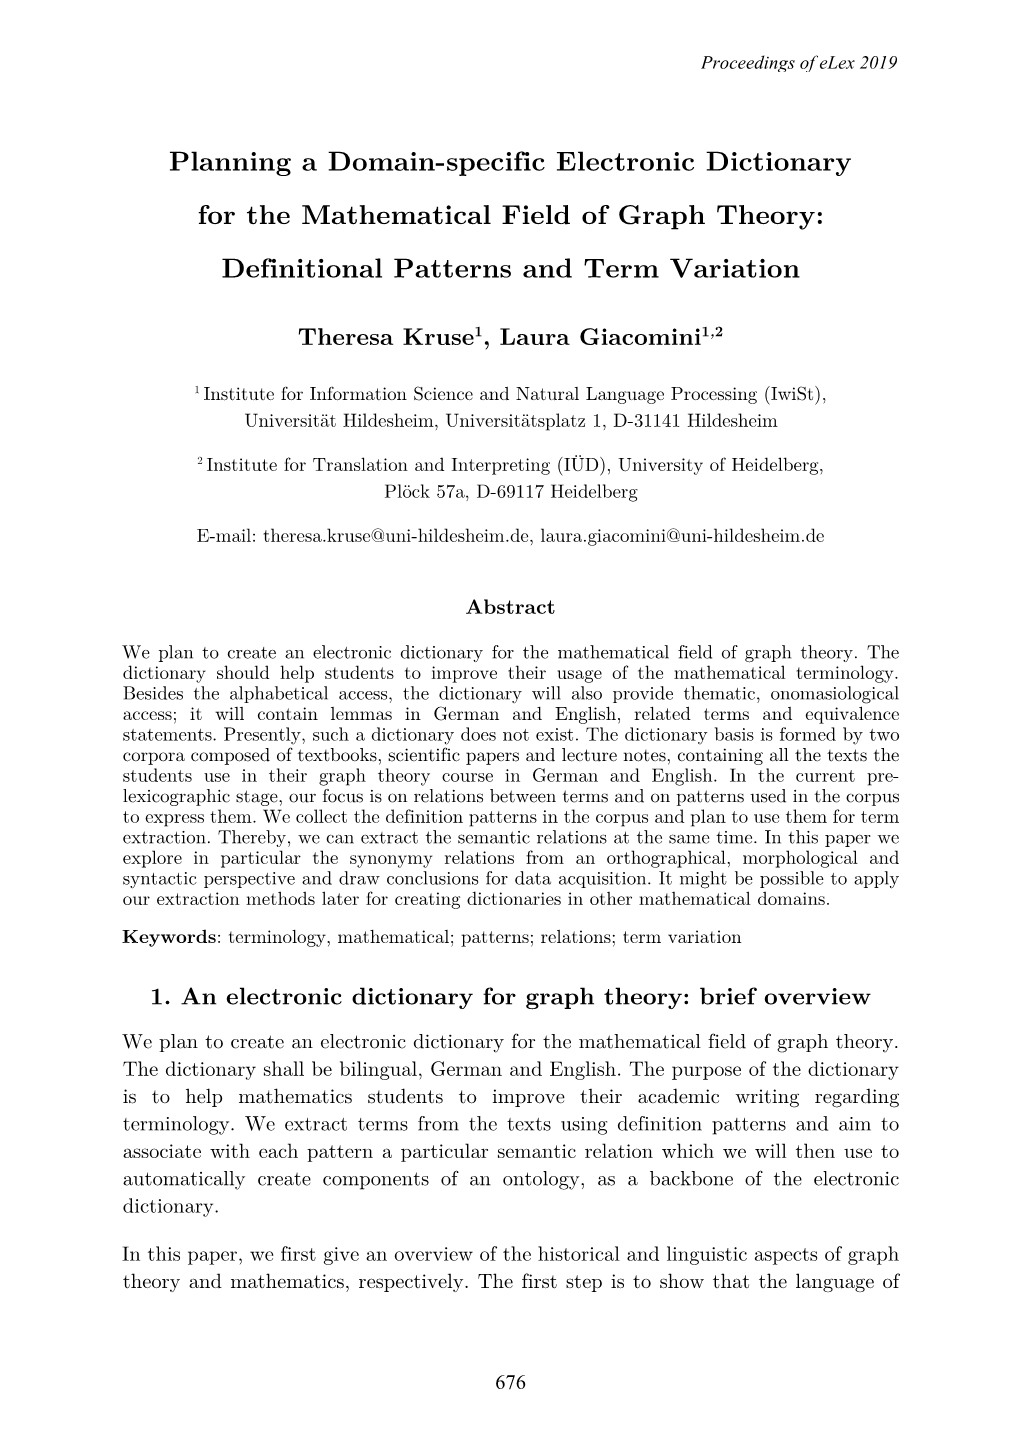 Planning a Domain-Specific Electronic Dictionary for the Mathematical Field of Graph Theory: Definitional Patterns and Term Variation